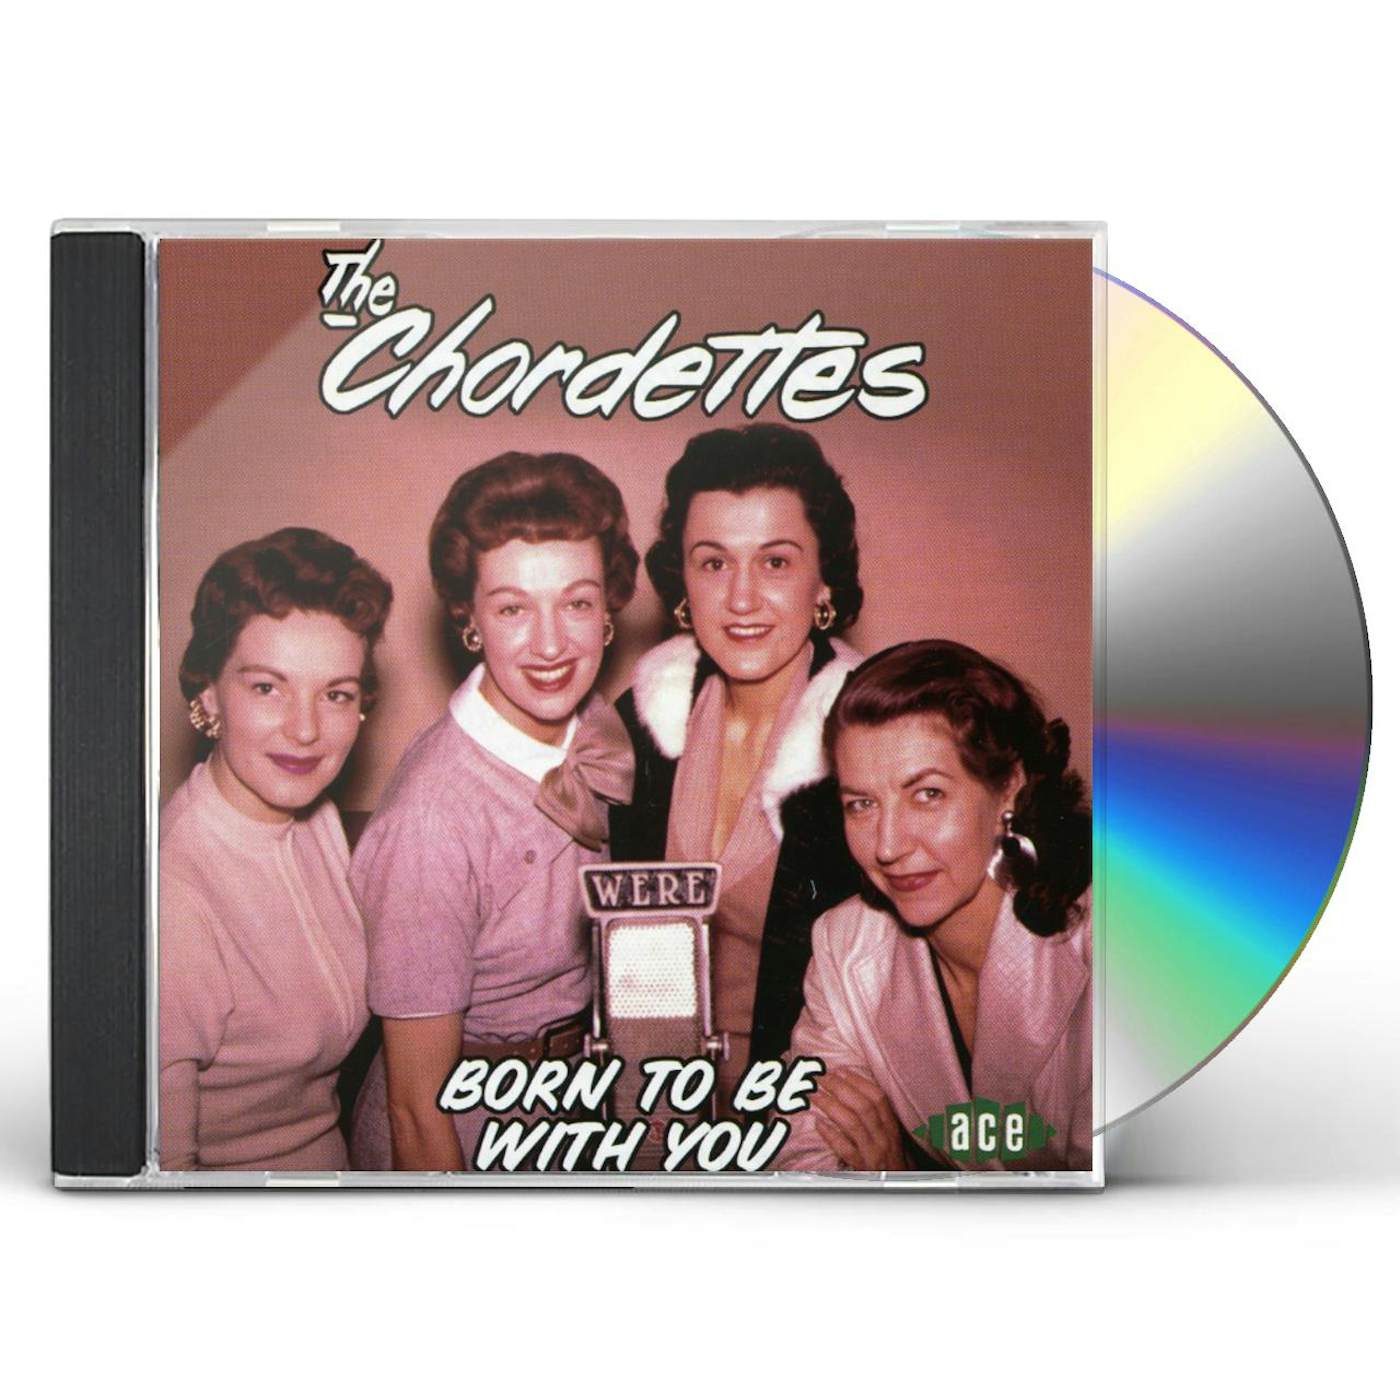 The Chordettes BORN TO BE WITH YOU CD